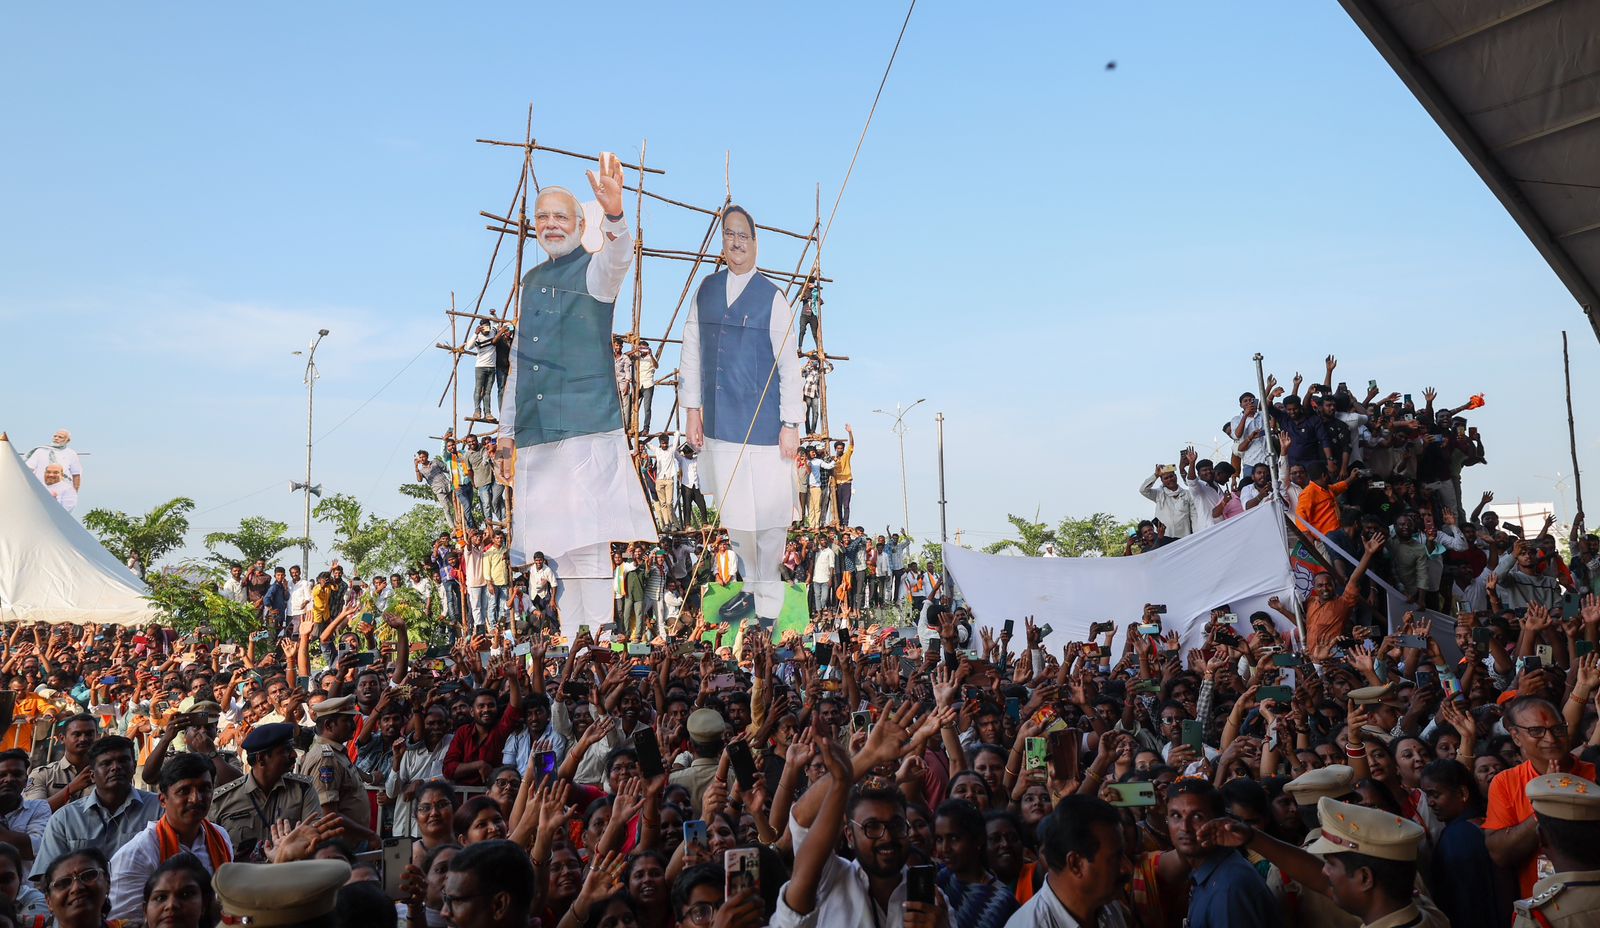 Supporters listen to Prime Minister Narendra Modi's speech during a public rally in Nizamabad on Tuesday.